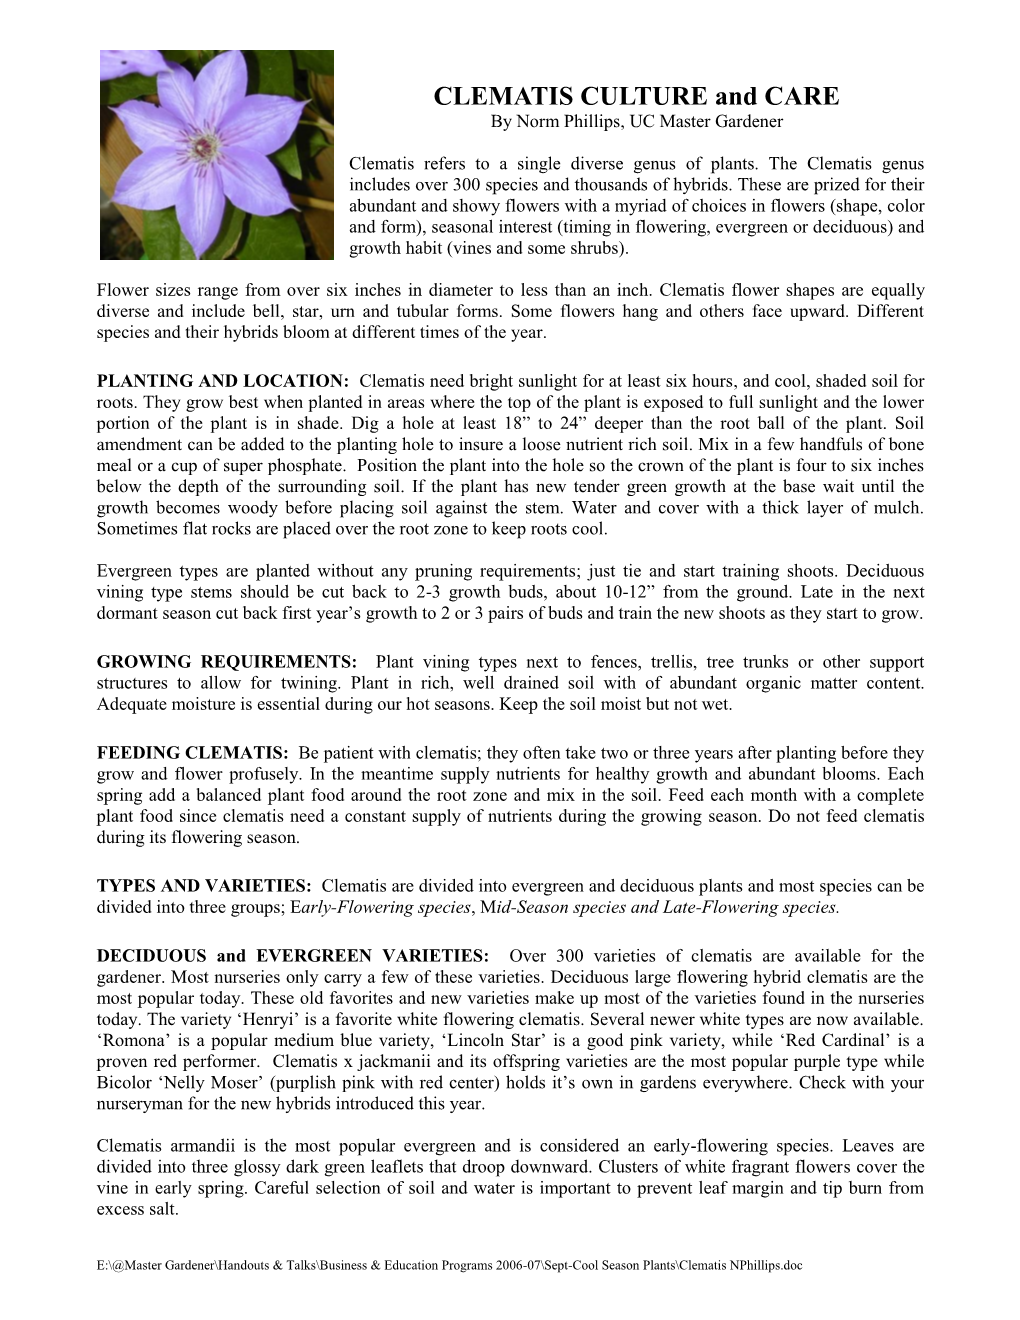 CLEMATIS CULTURE and CARE by Norm Phillips, UC Master Gardener